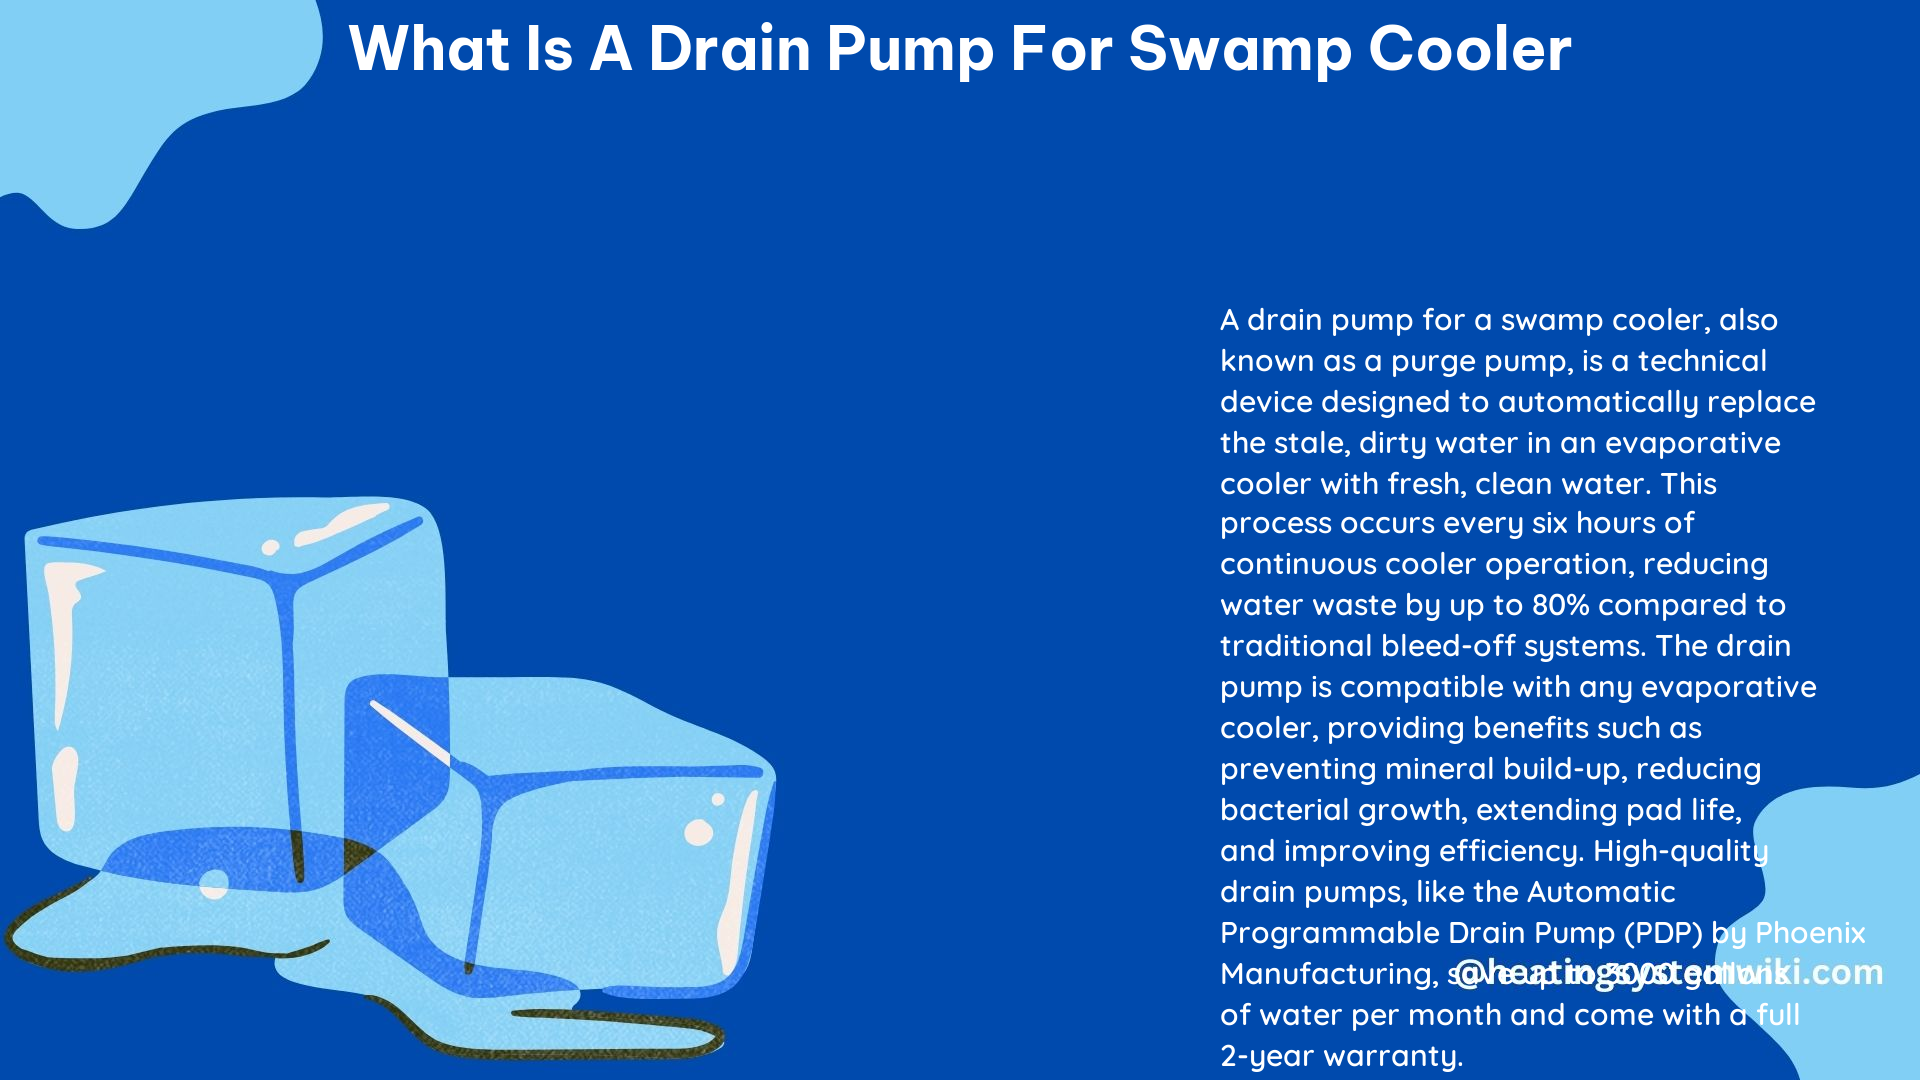 What Is a Drain Pump for Swamp Cooler